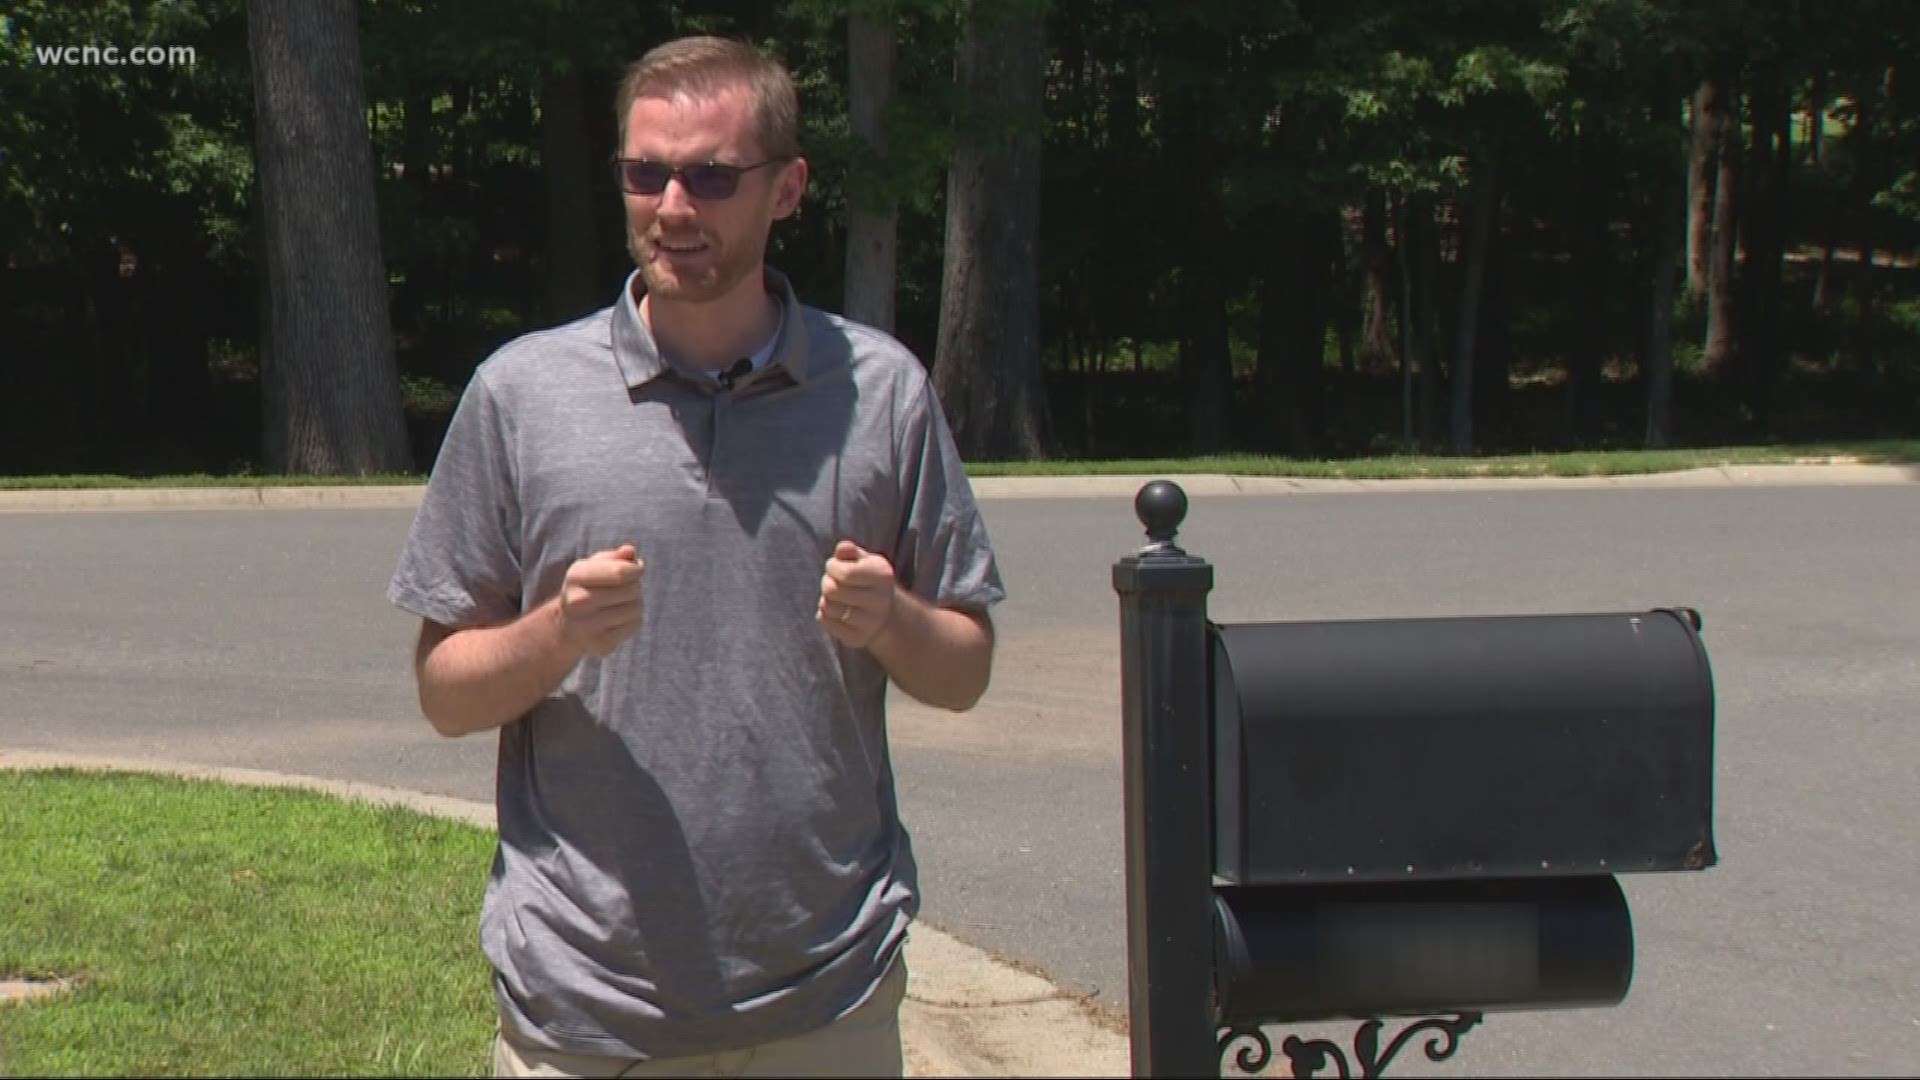 A Waxhaw man said he felt the temptation of a lifetime when a $1 million check showed up in his mailbox.